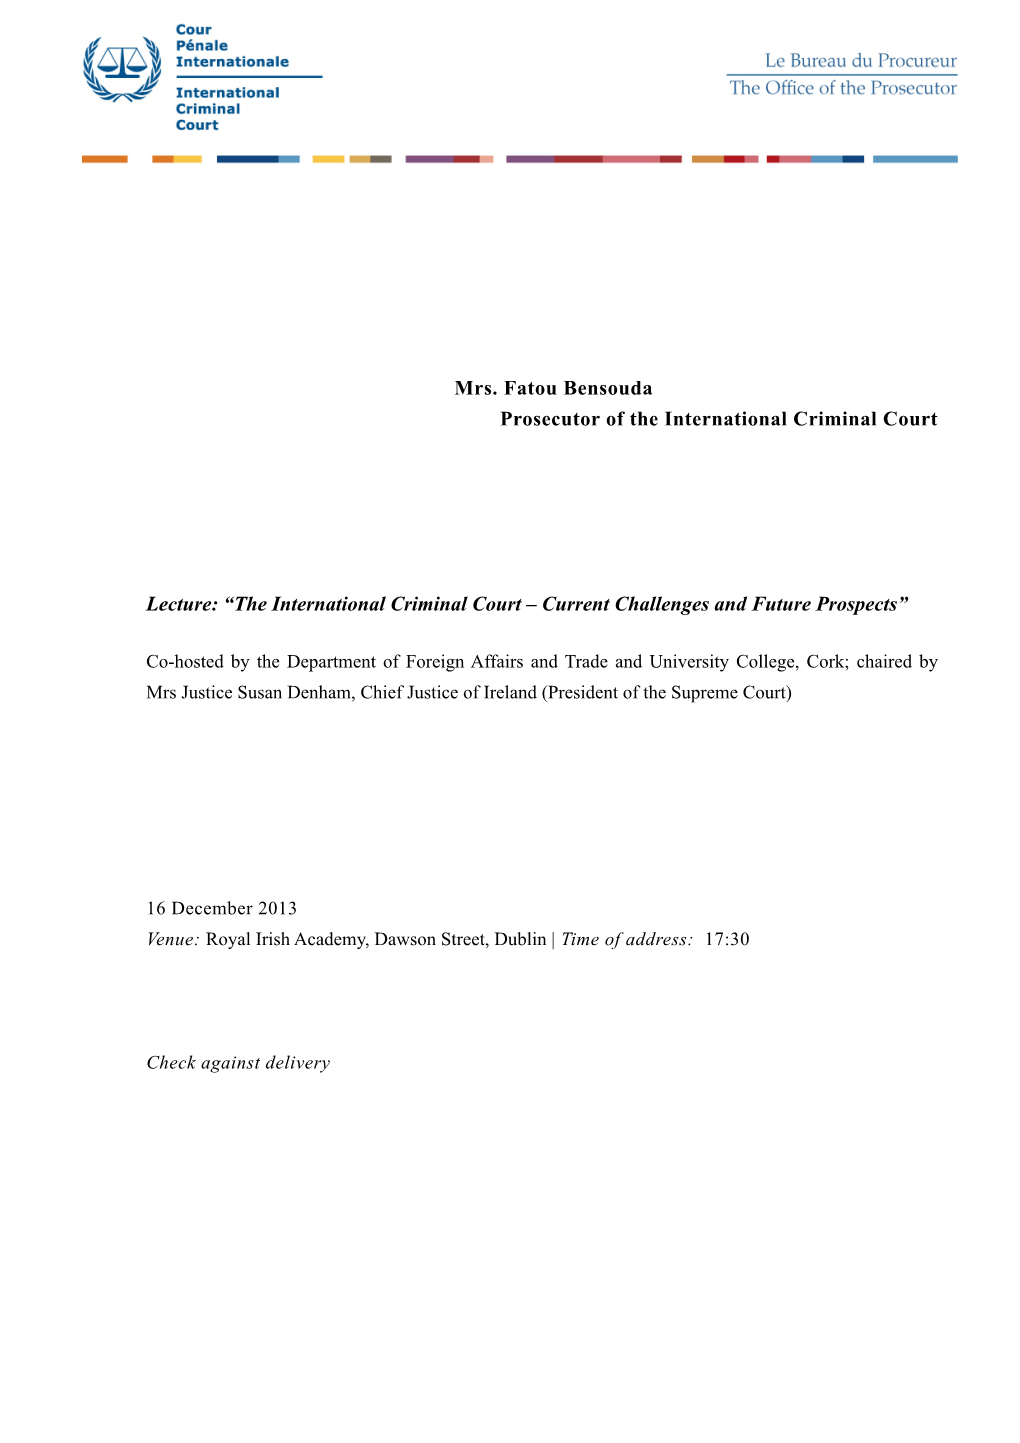 Lecture: “The International Criminal Court – Current Challenges and Future Prospects”